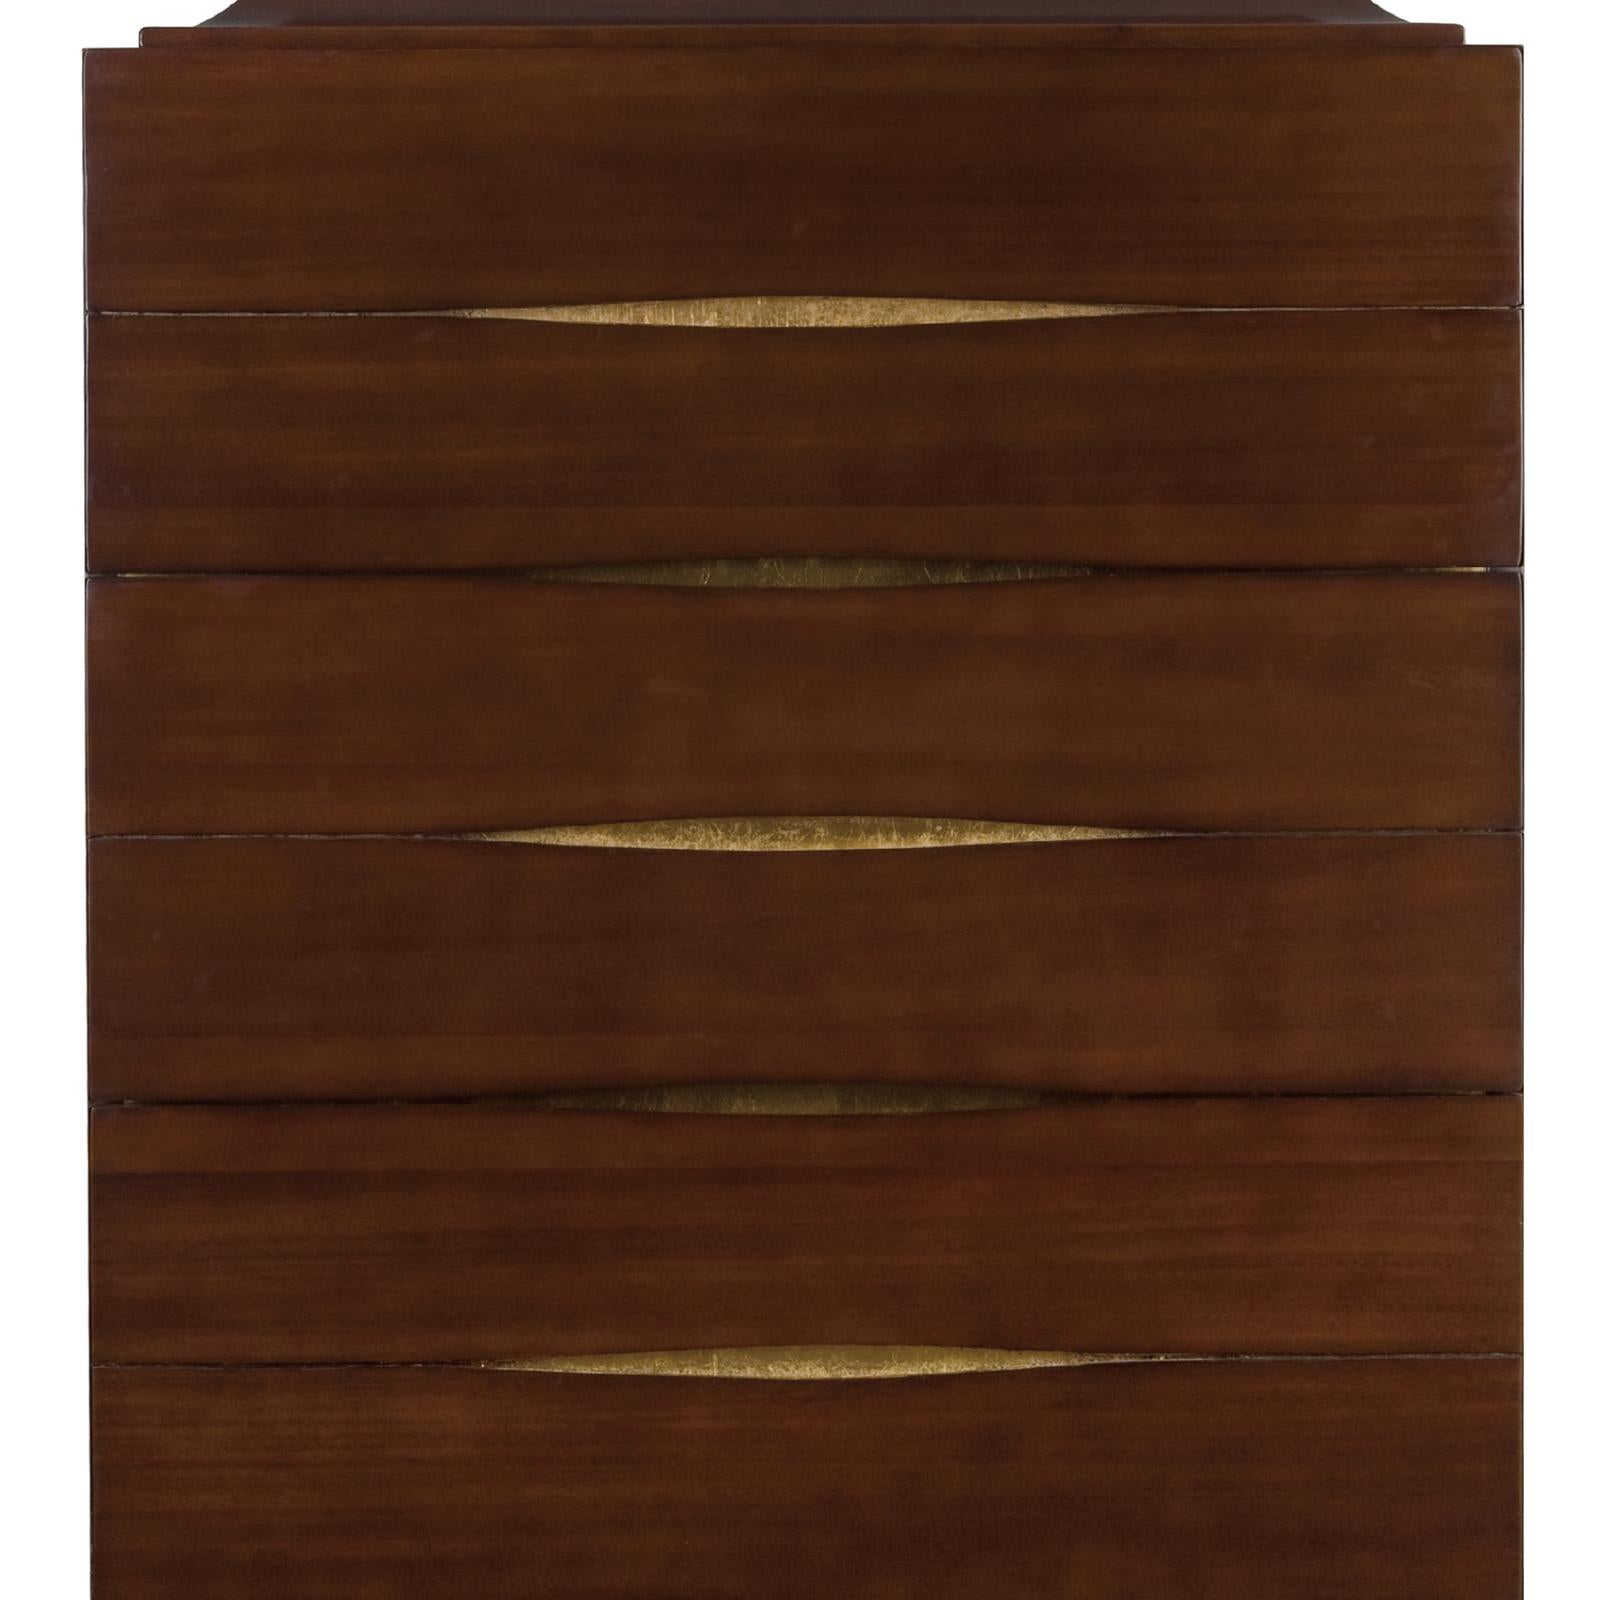 English Silky Chest of Drawers in Solid Mahogany Wood